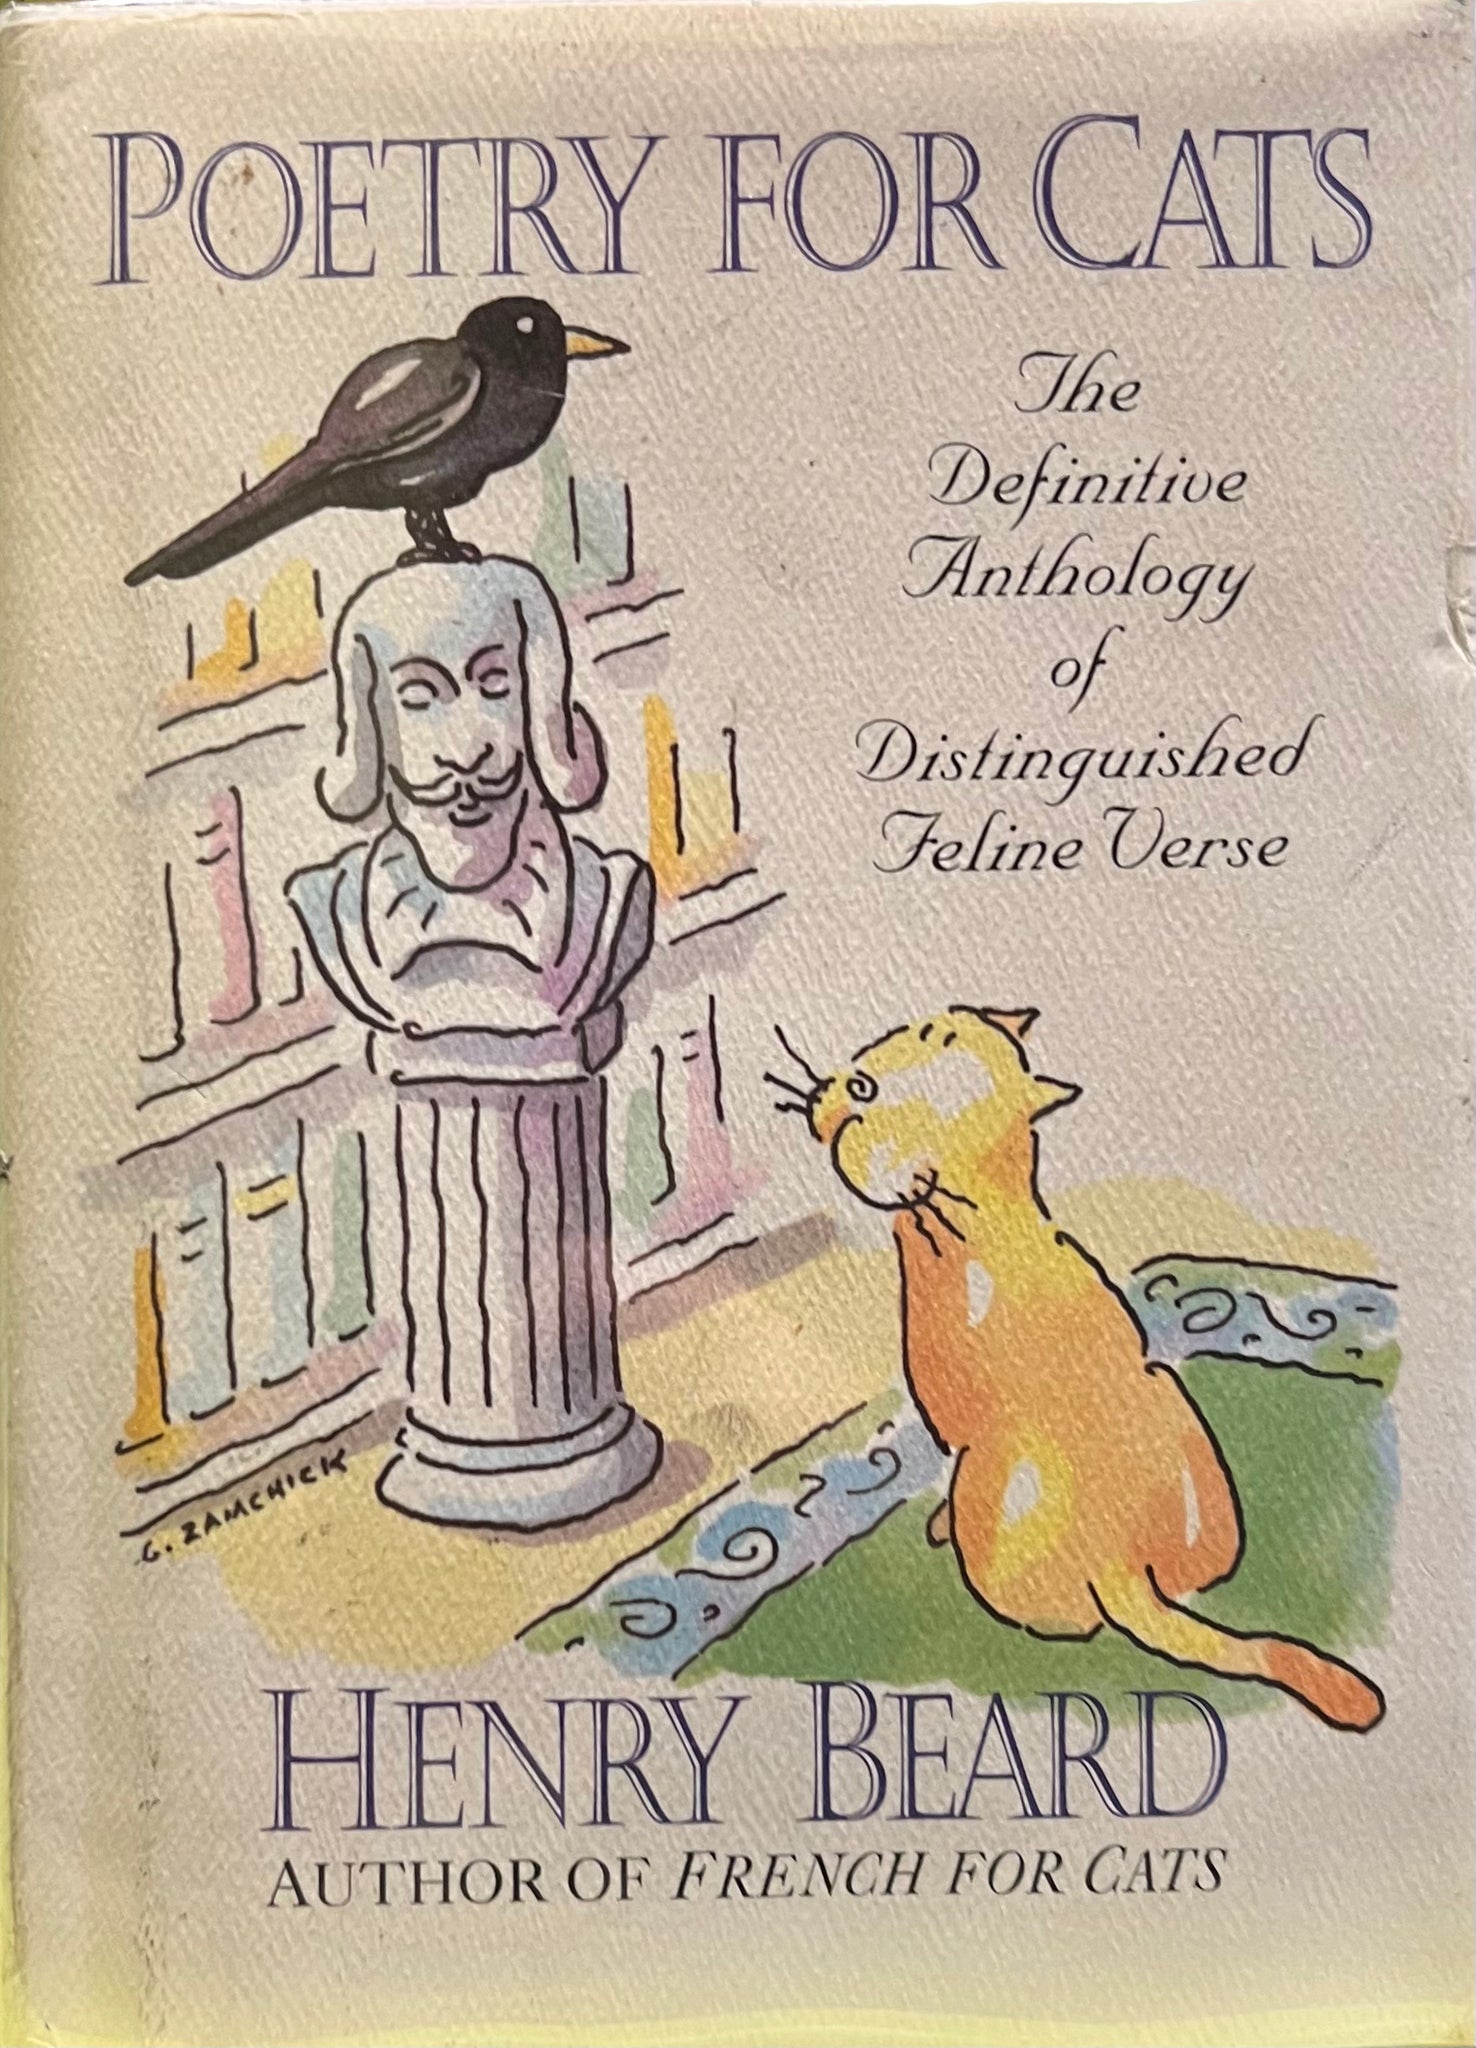 Poetry for Cats: The Definitive Anthology of Distinguished Feline Verse, Henry Bears